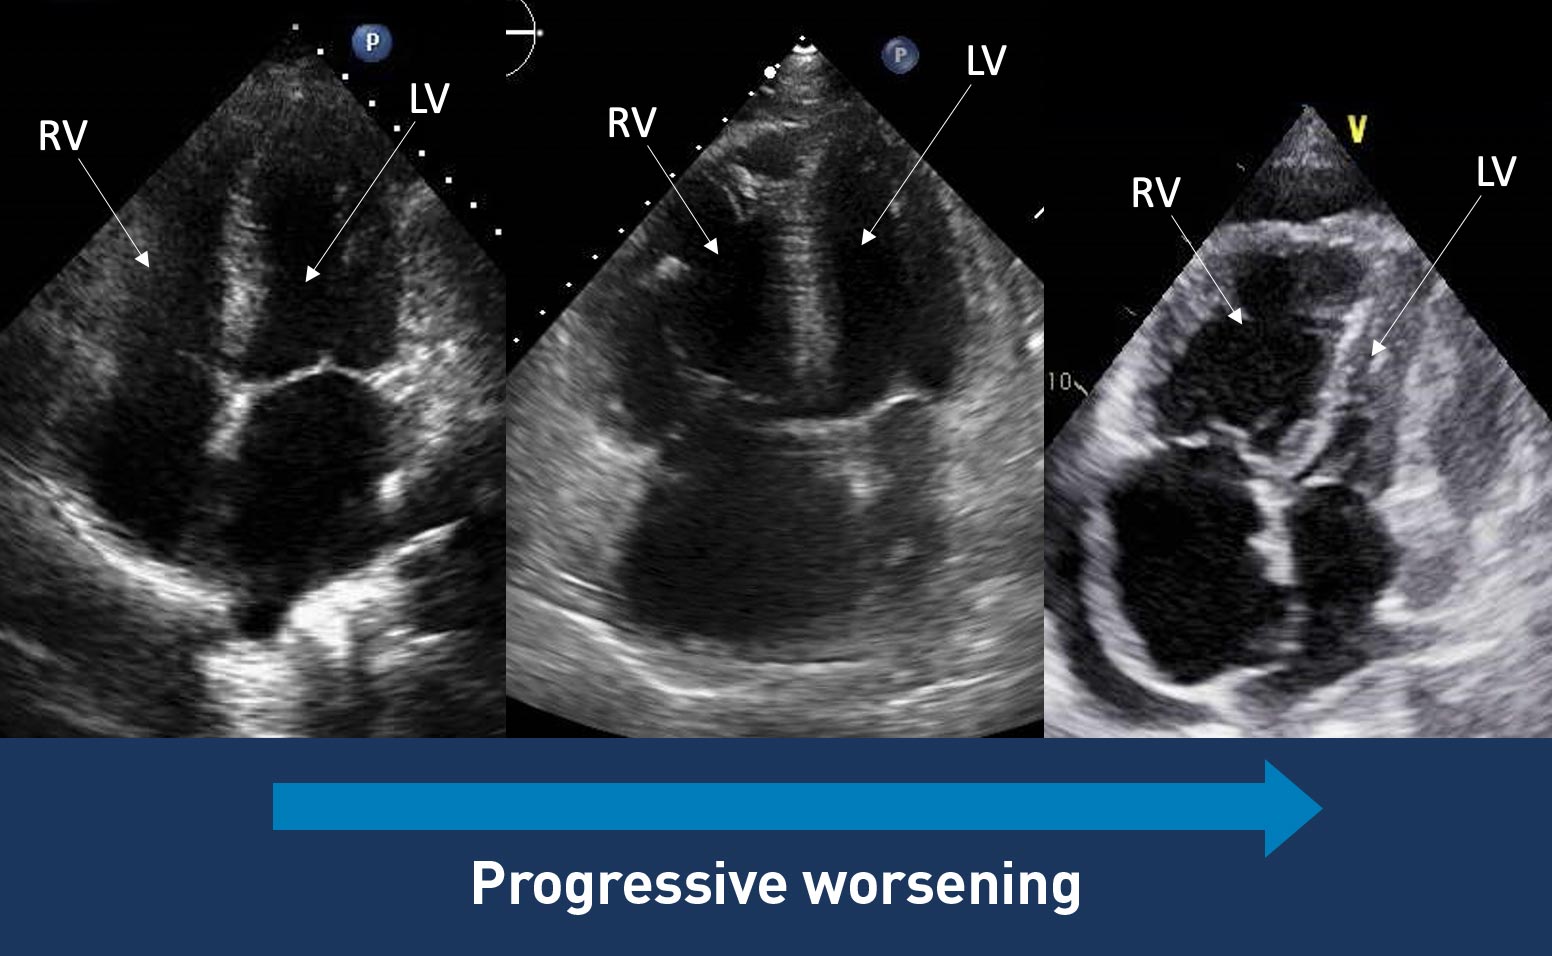 Echo of the heart that the progressive dilation of the RV and RA in PAH